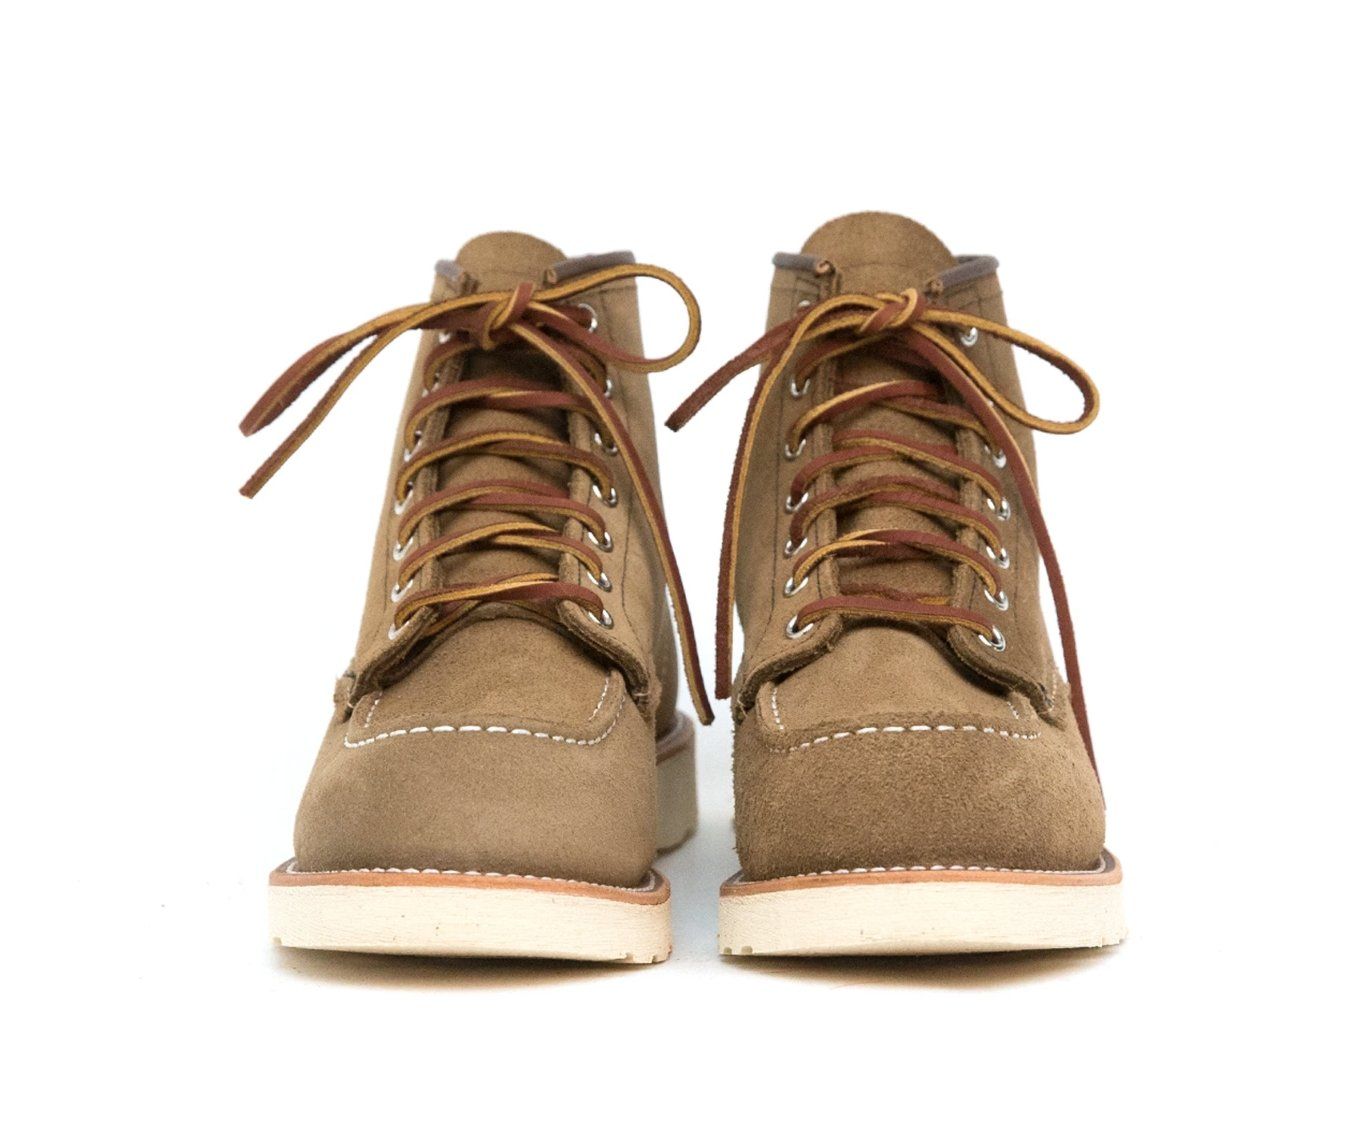 RED WING - CLASSIC MOC | 6-inch | Olive Mohave - HANSEN Garments